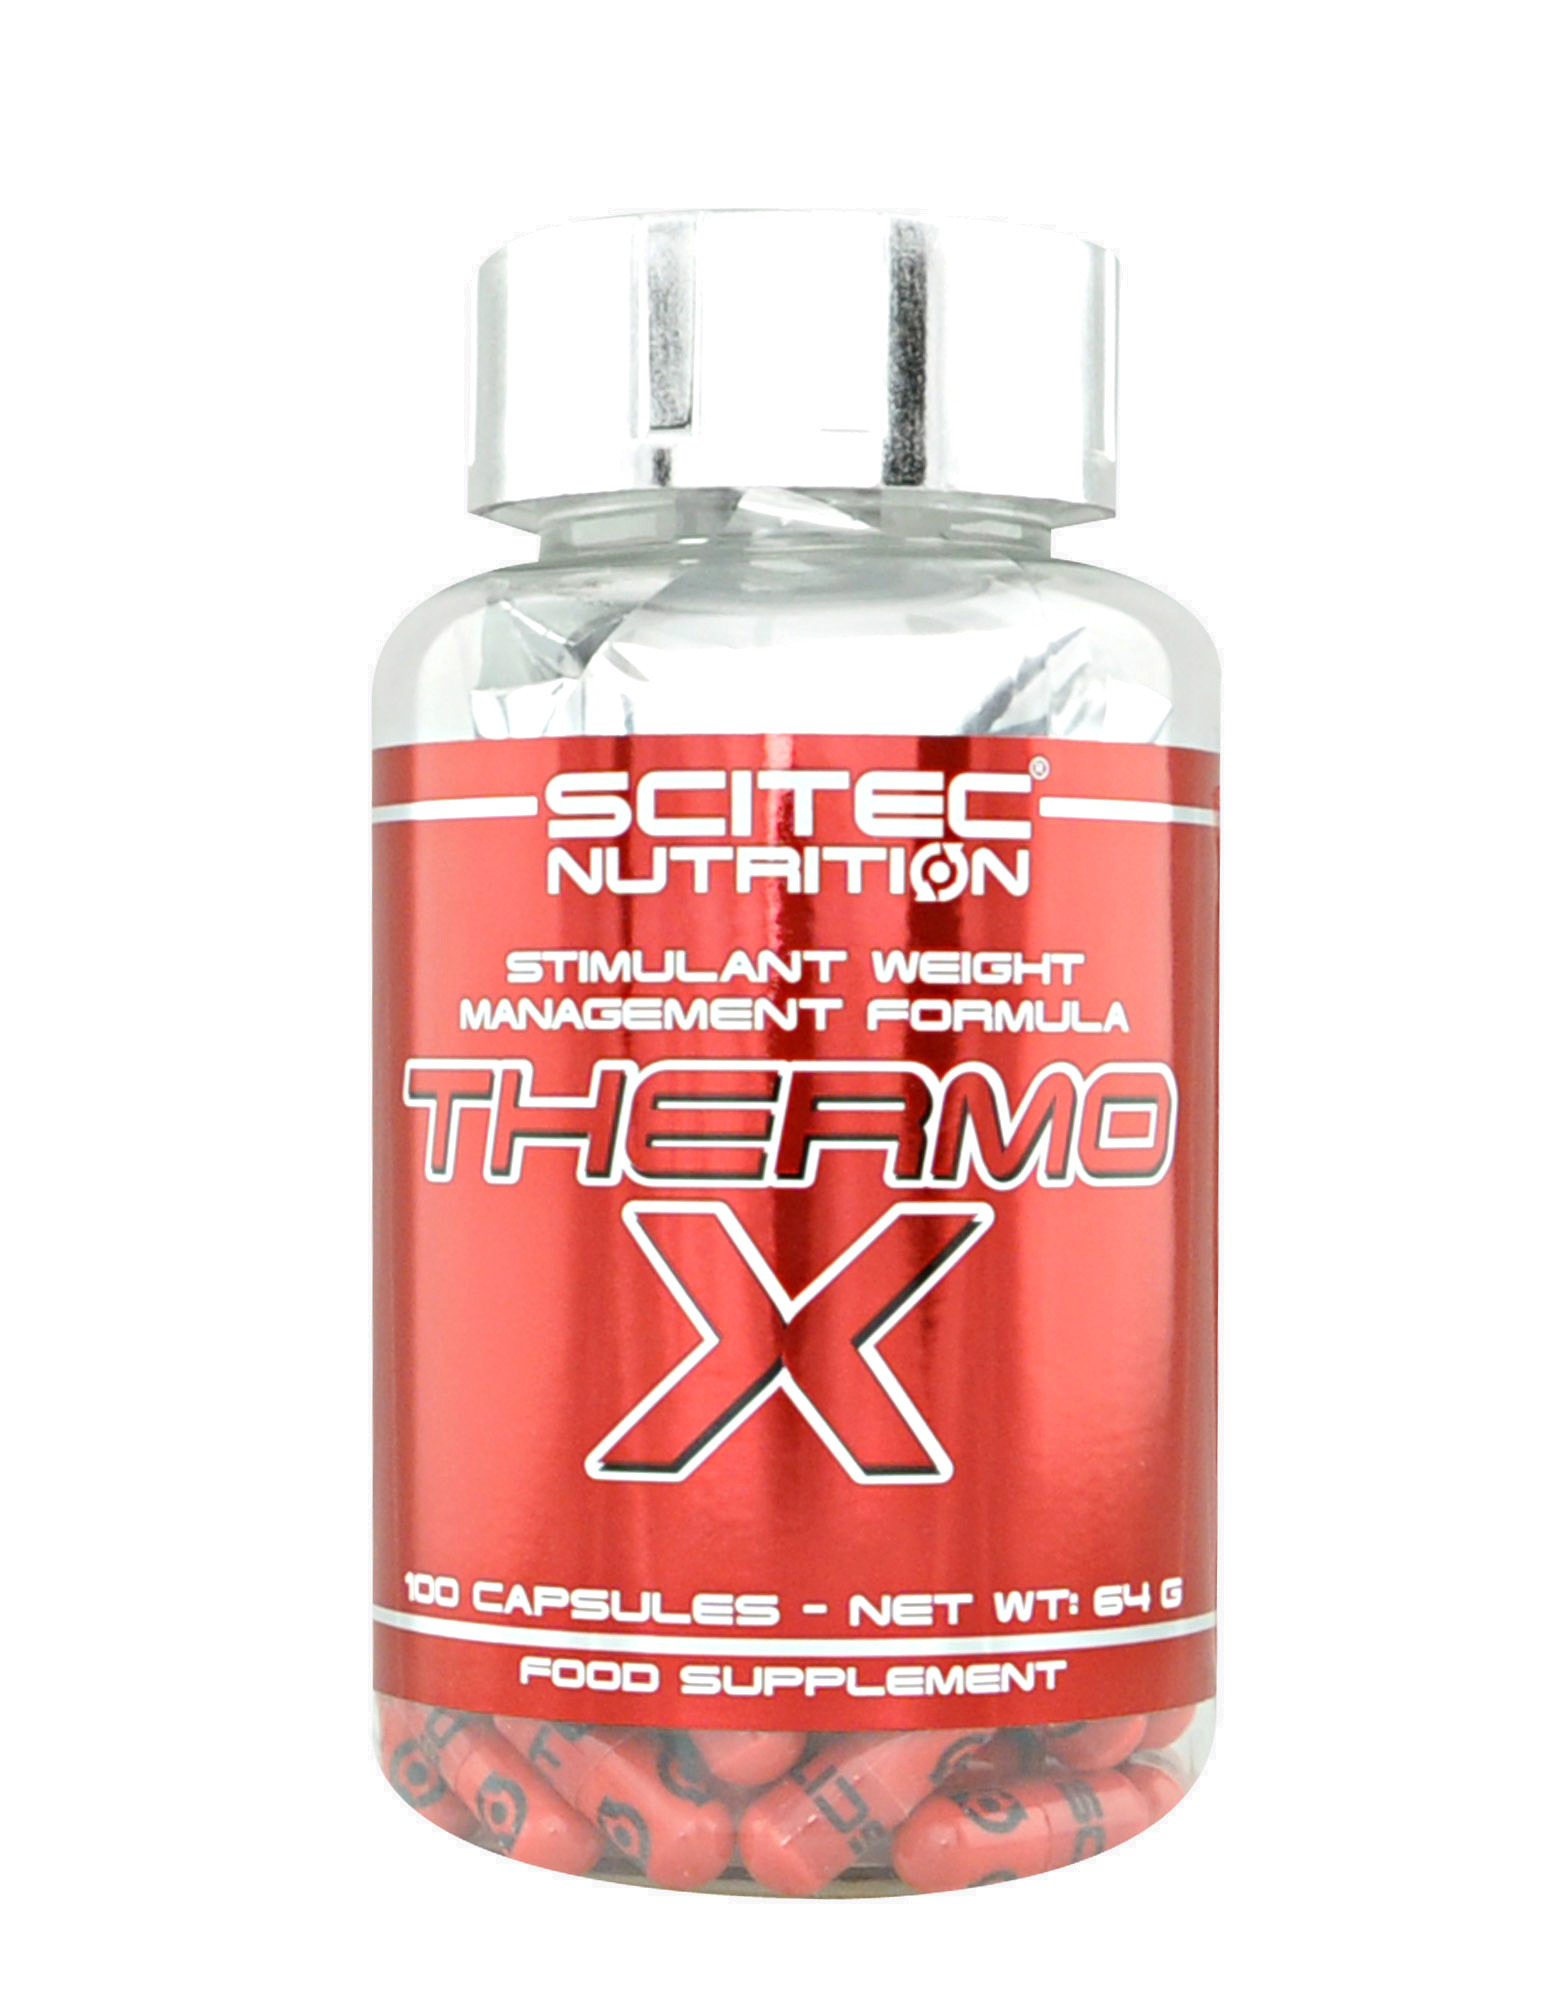 thermo x fat burner review)